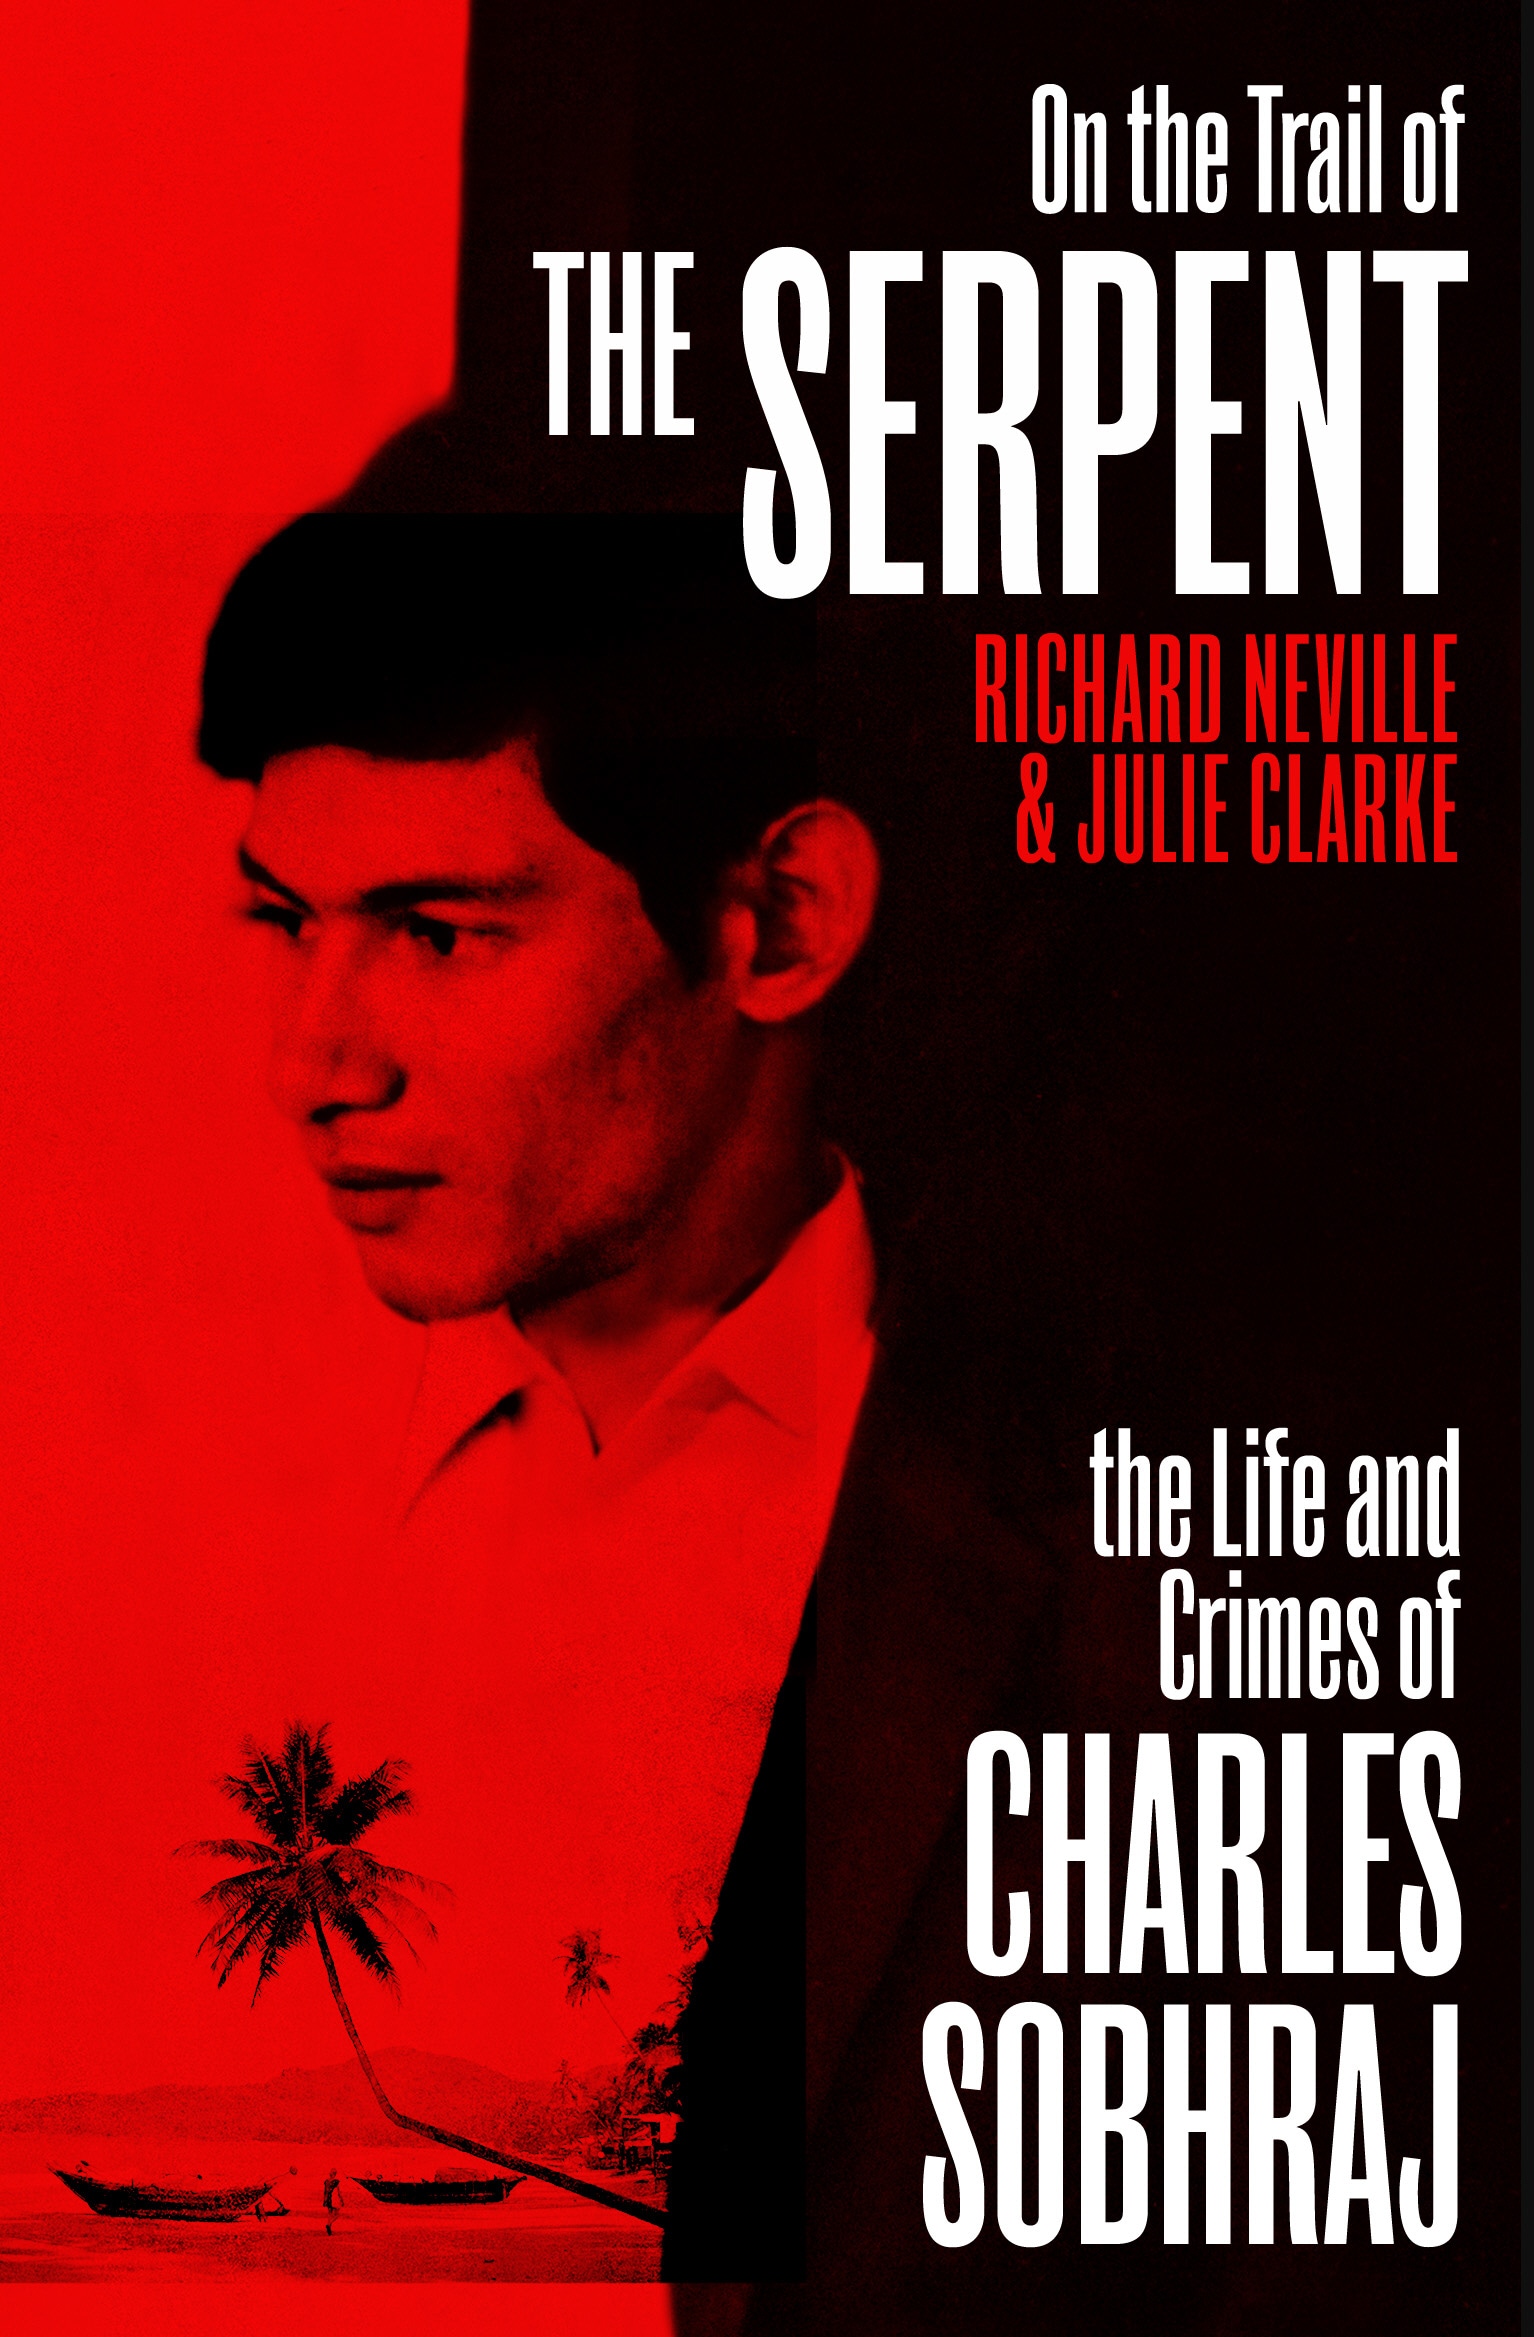 Book “On the Trail of the Serpent” by Richard Neville, Julie Clarke — December 3, 2020